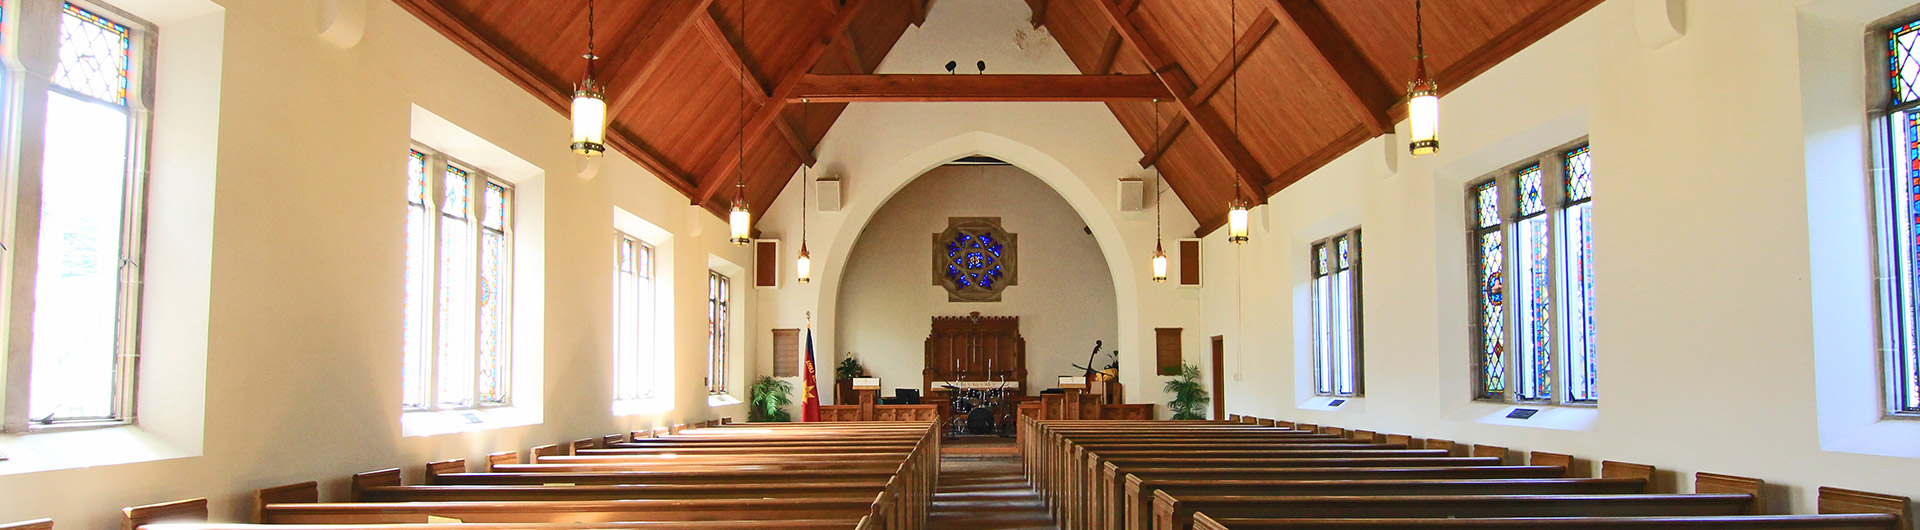 View of a church from the back pews facing the altar